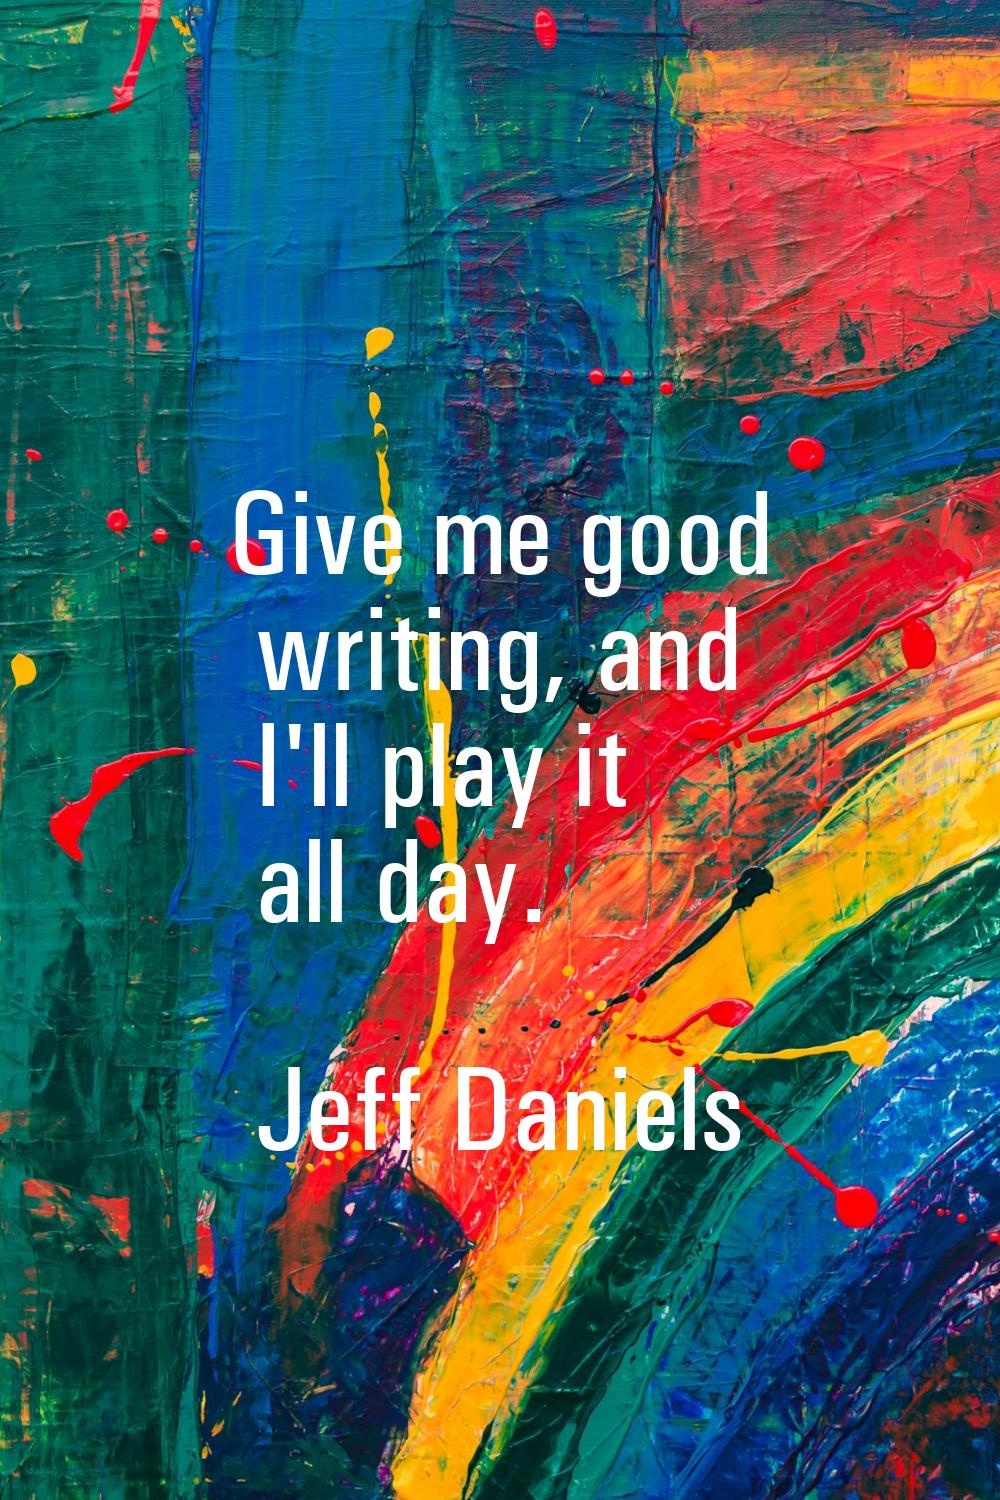 Give me good writing, and I'll play it all day.